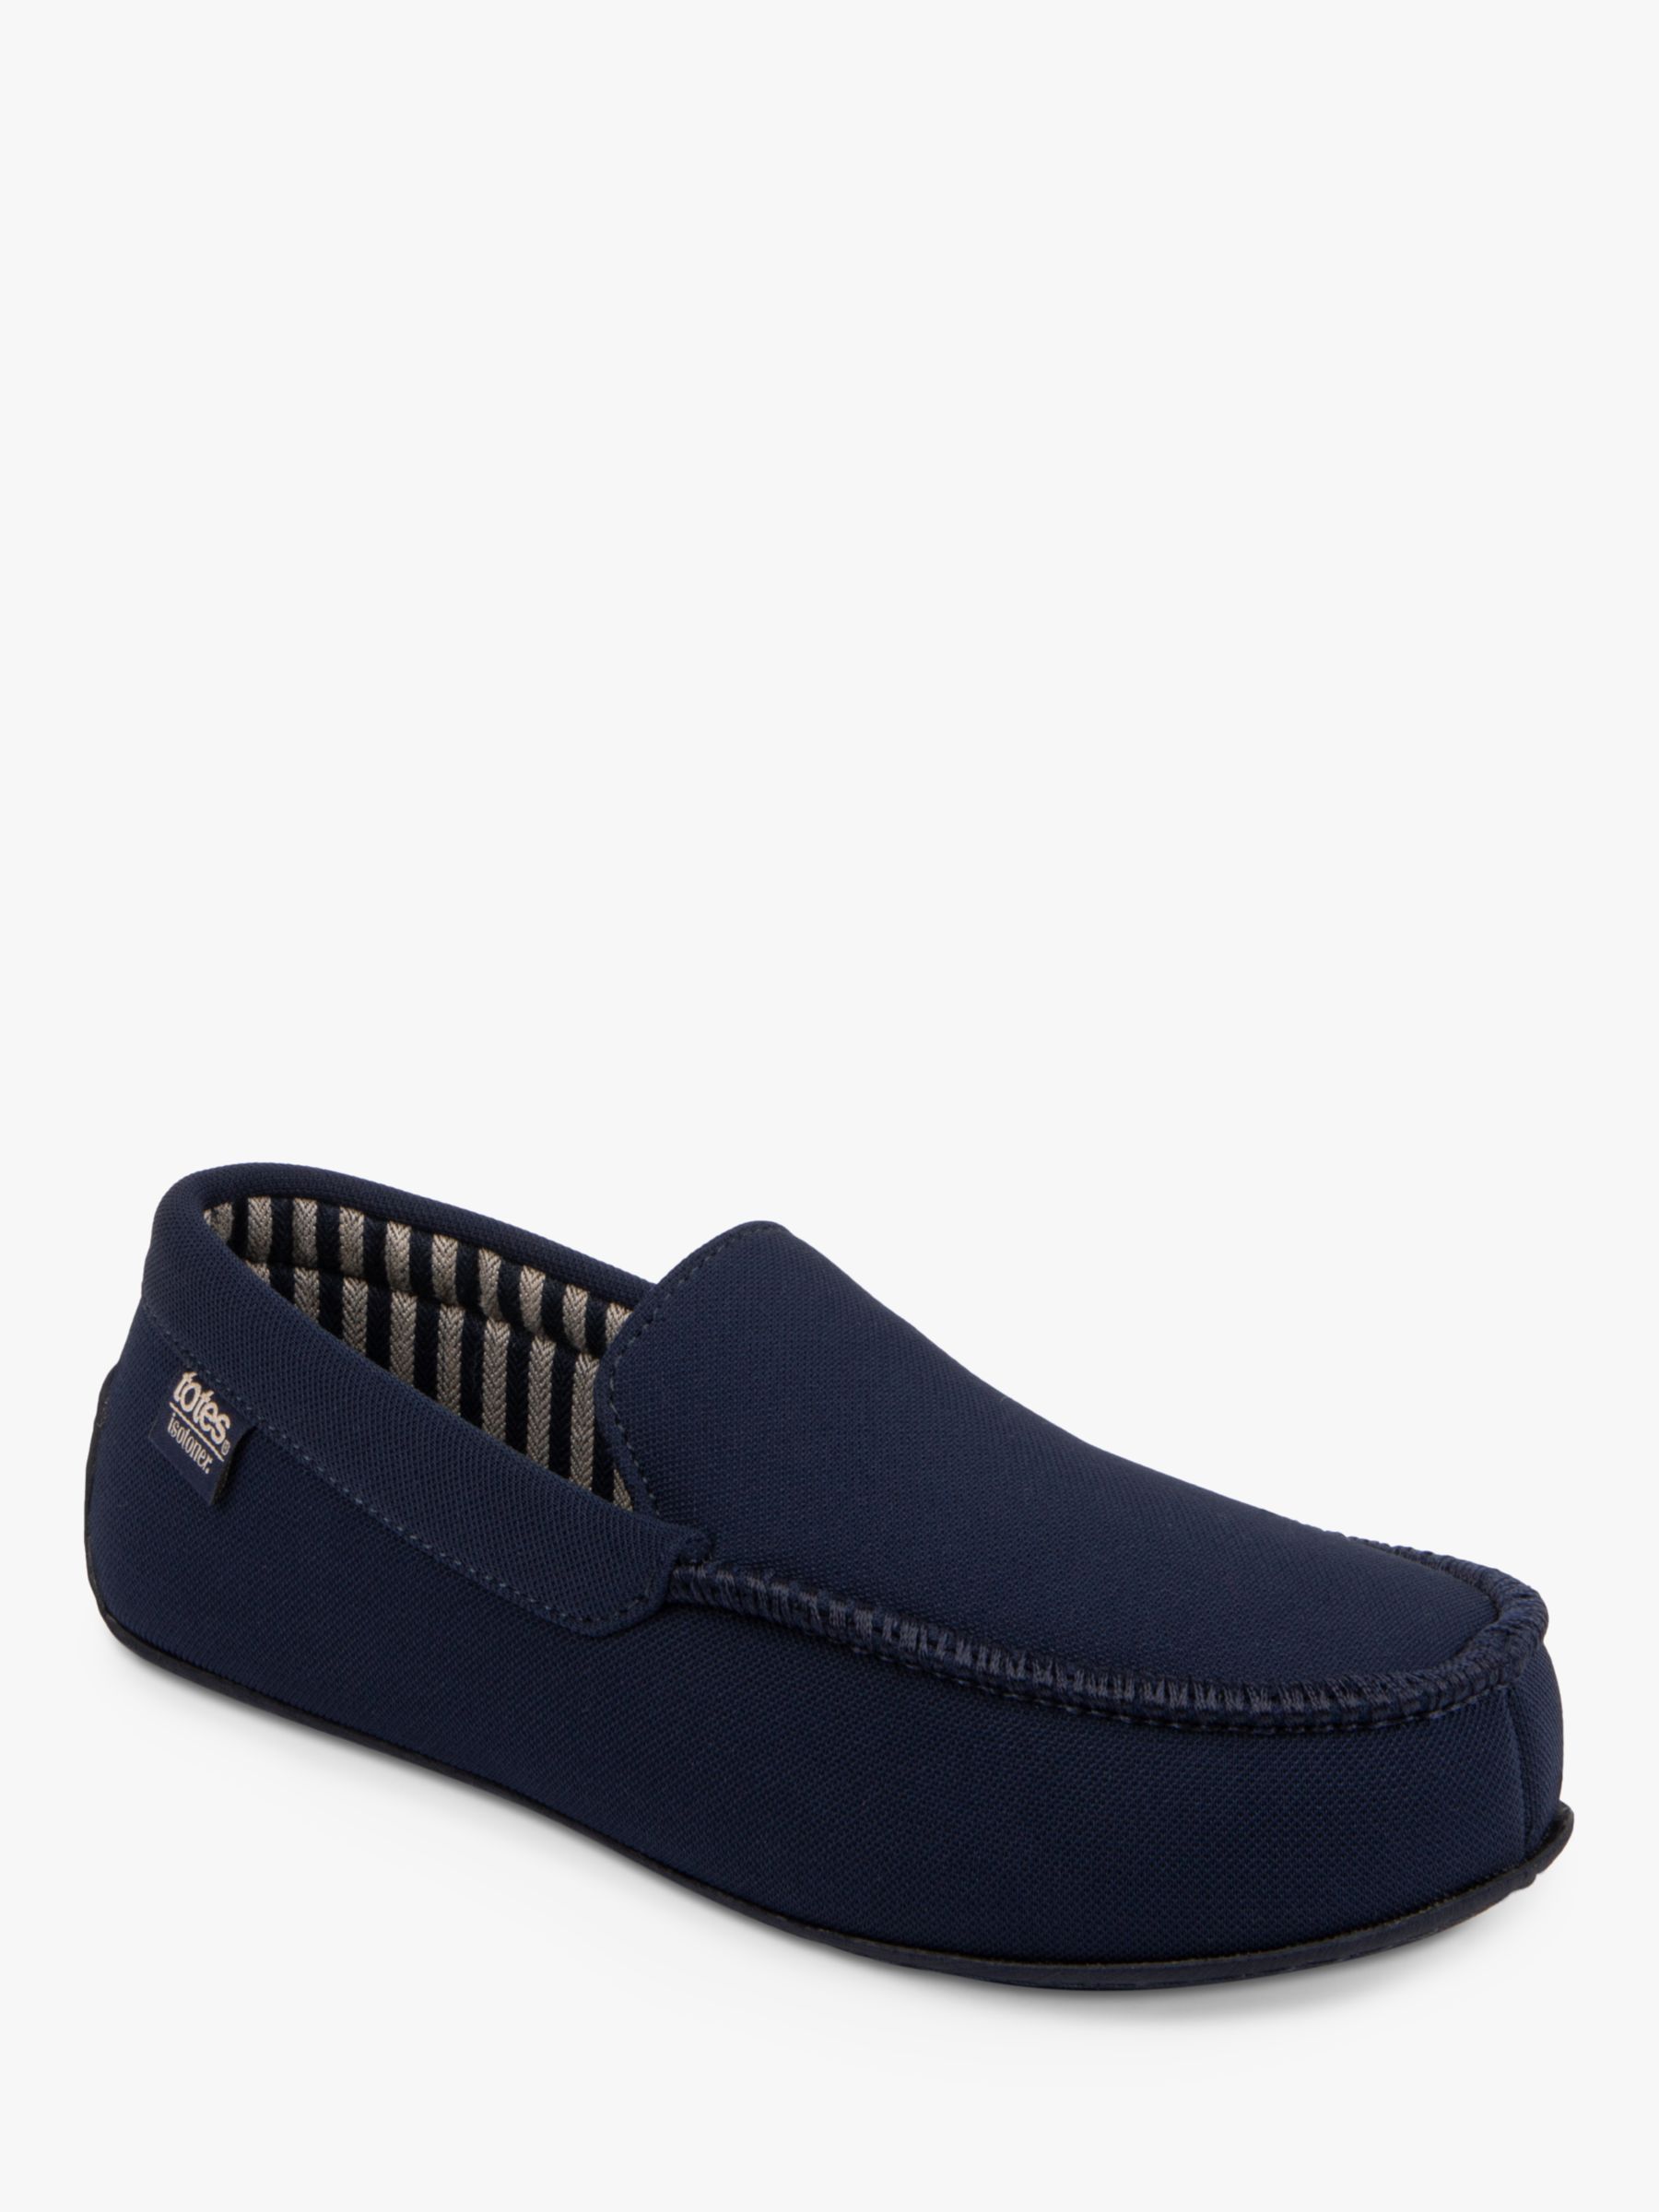 Buy totes Textured Moccasin, Navy Online at johnlewis.com